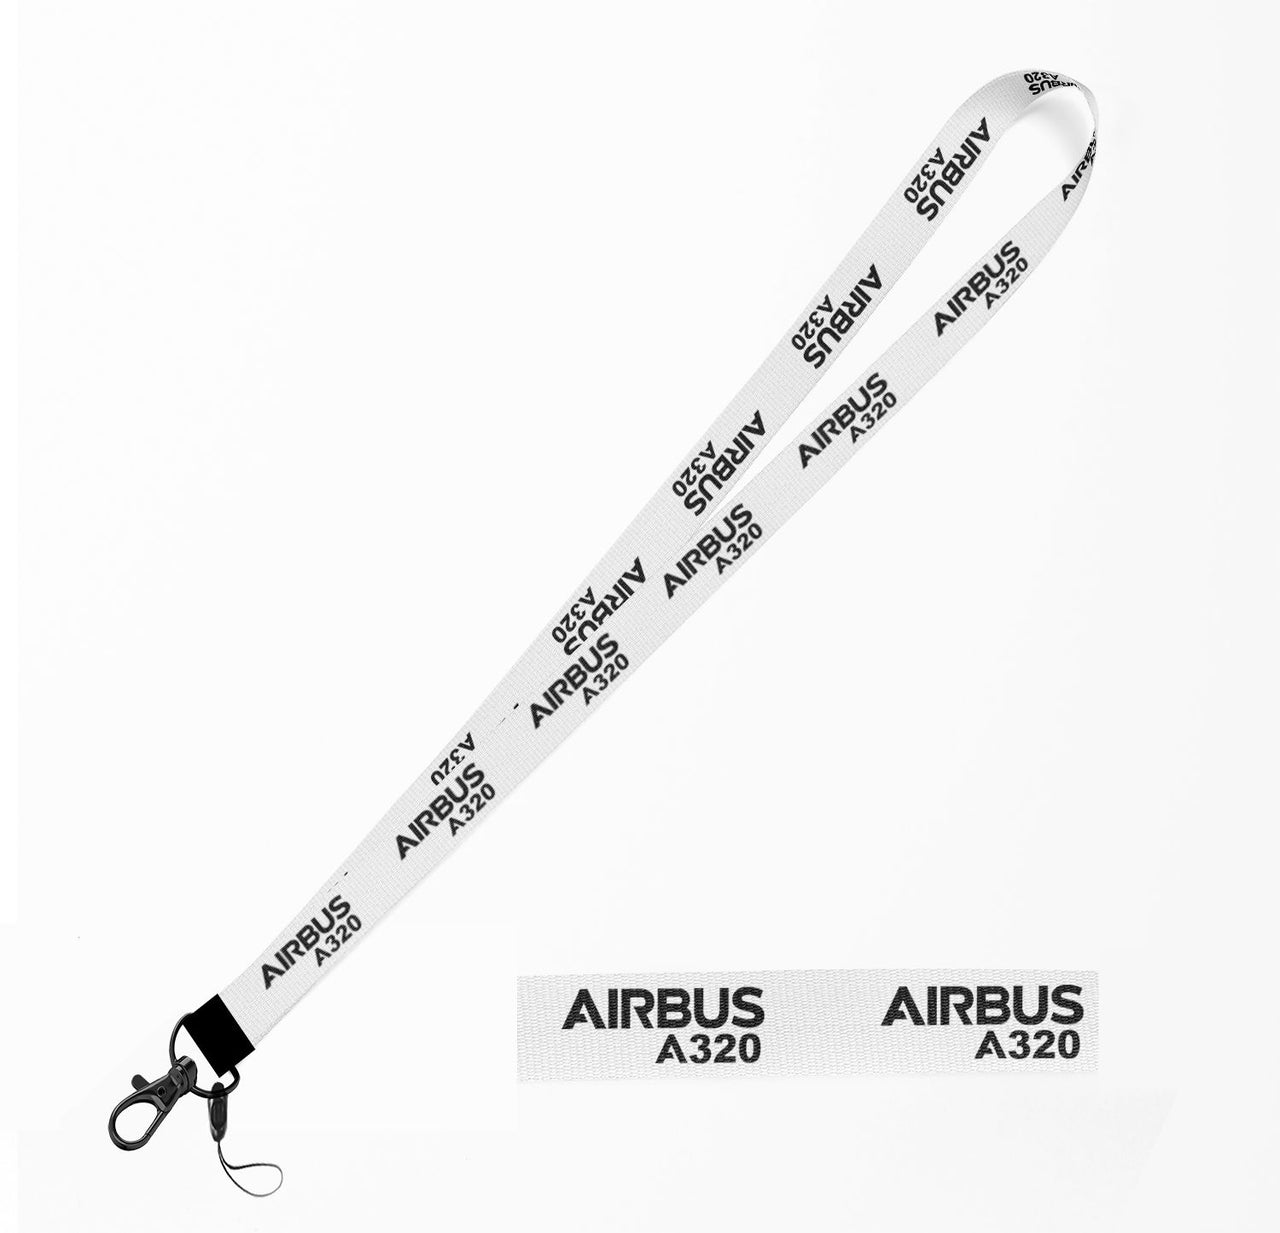 Airbus A320 & Text Designed Lanyard & ID Holders